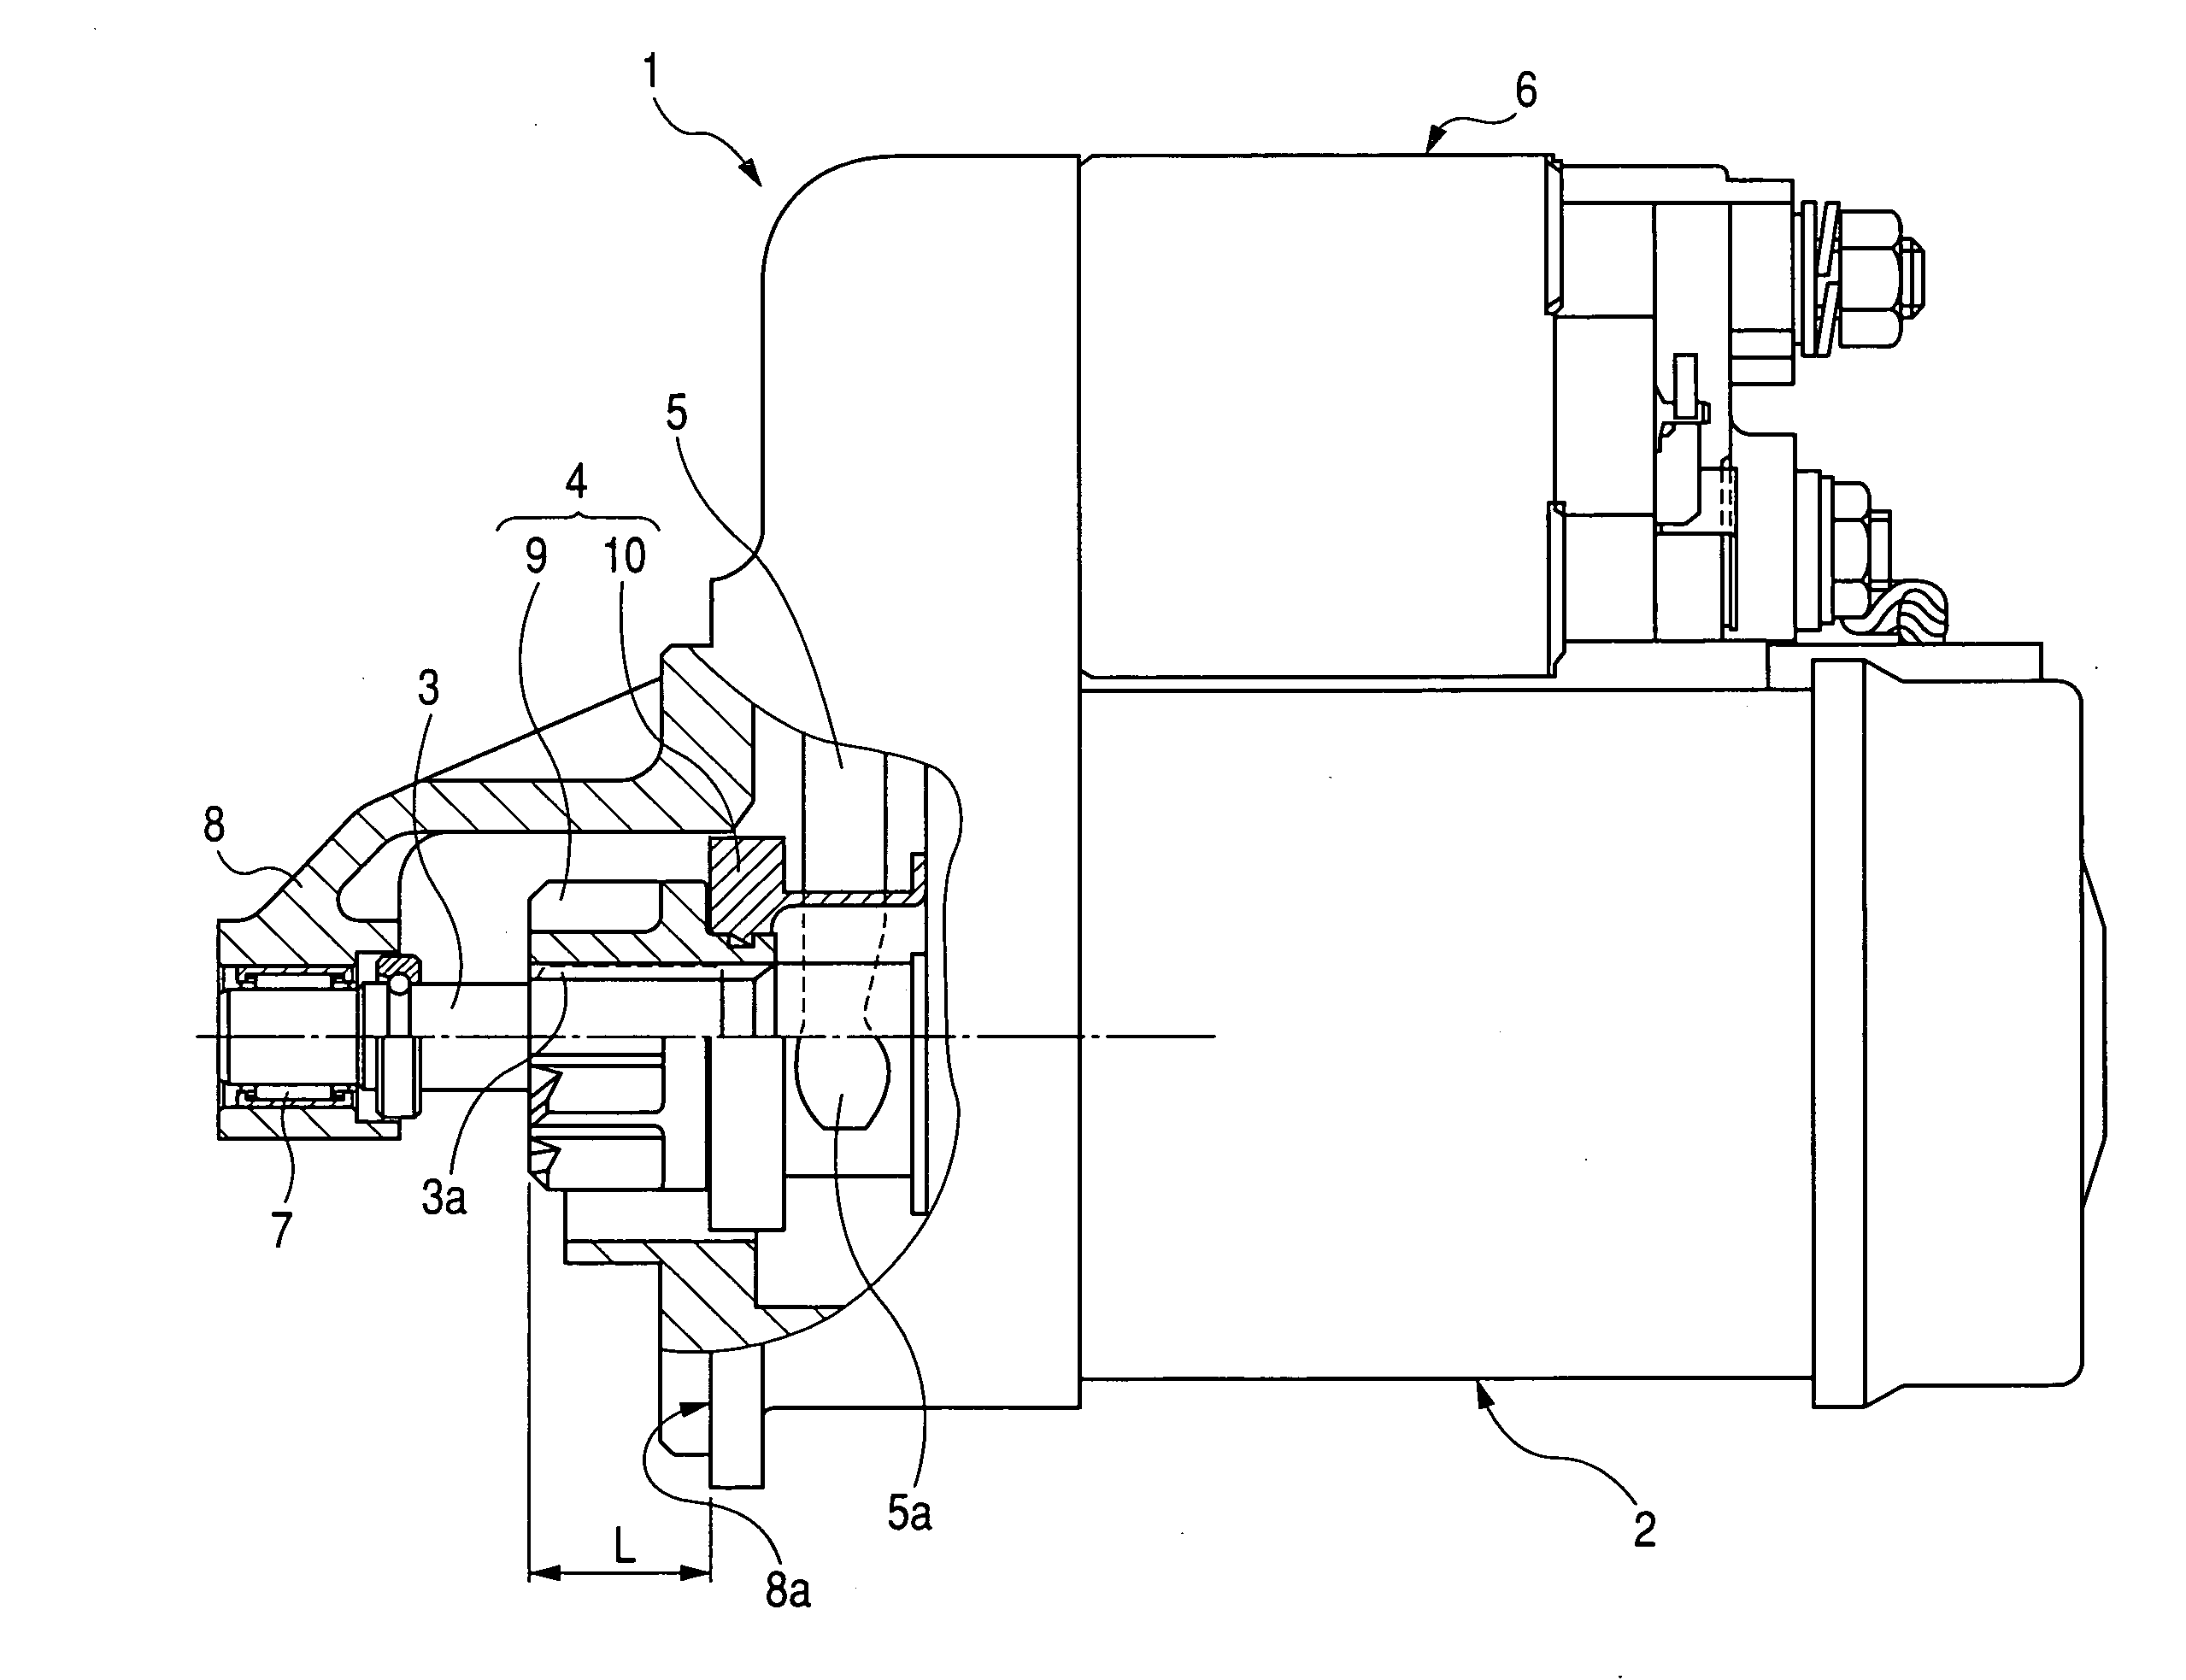 Compact structure of starter